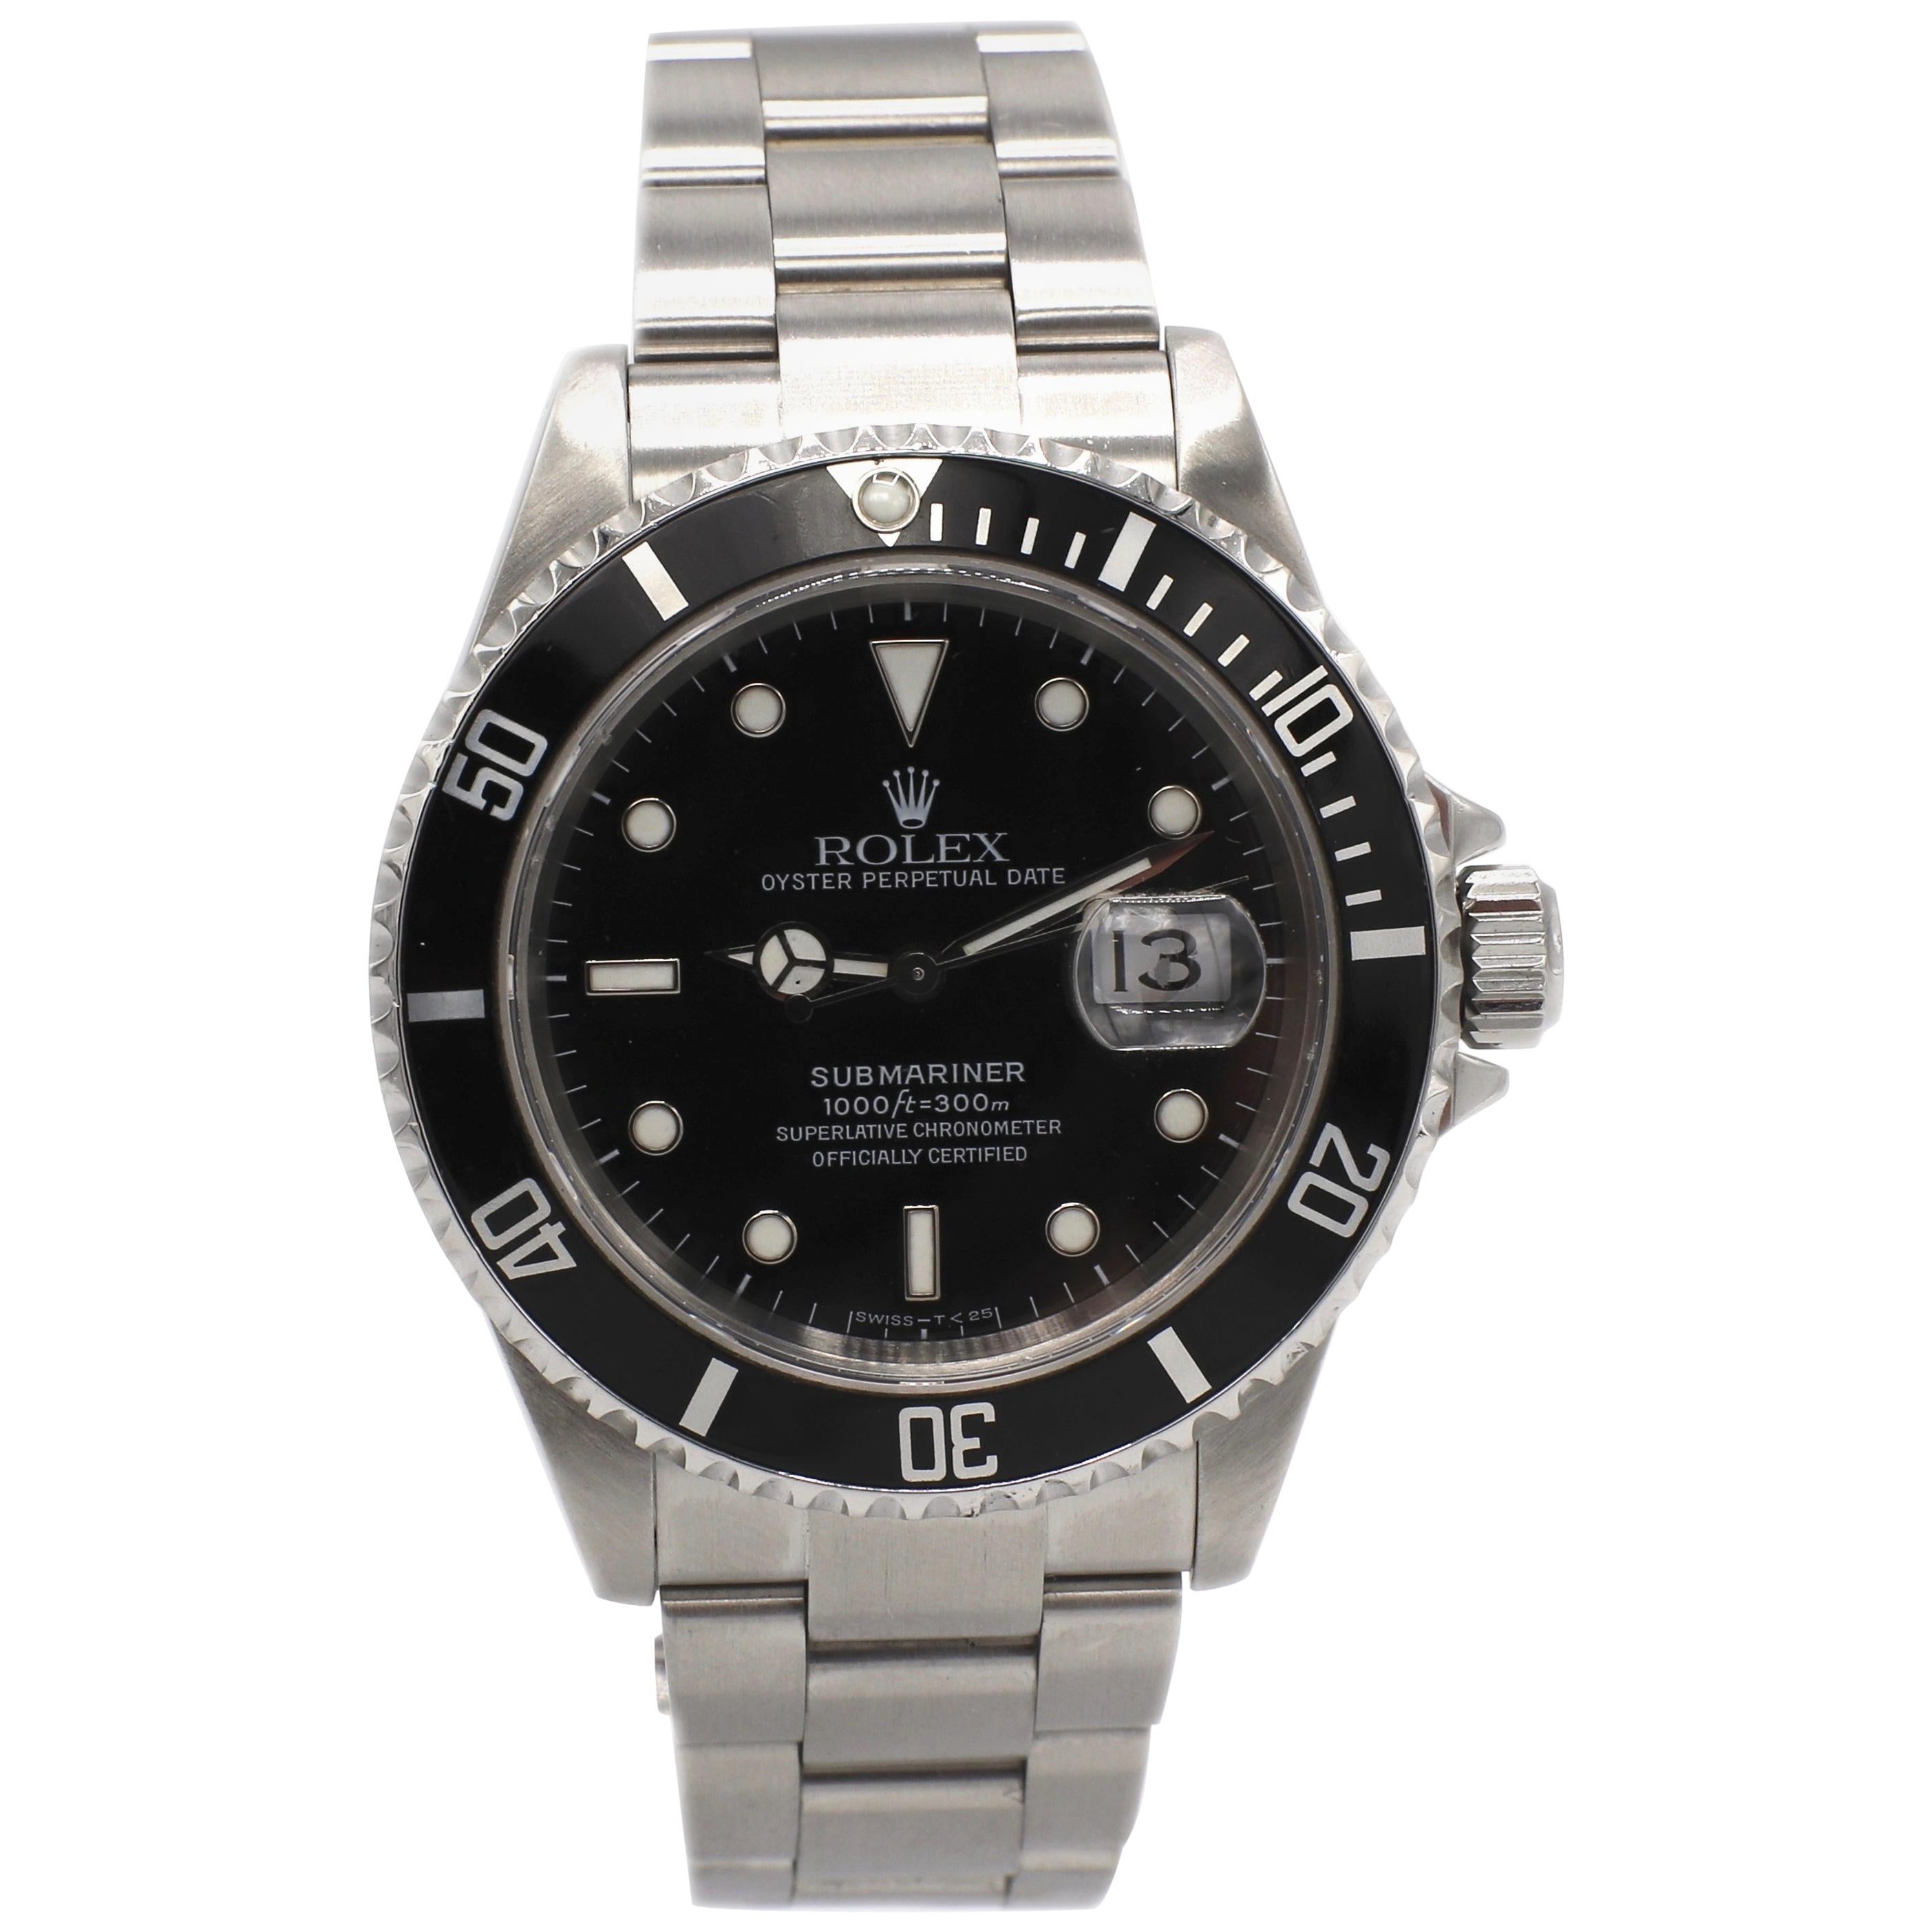 Vintage Rolex Submariner Stainless Steel Reference 16610